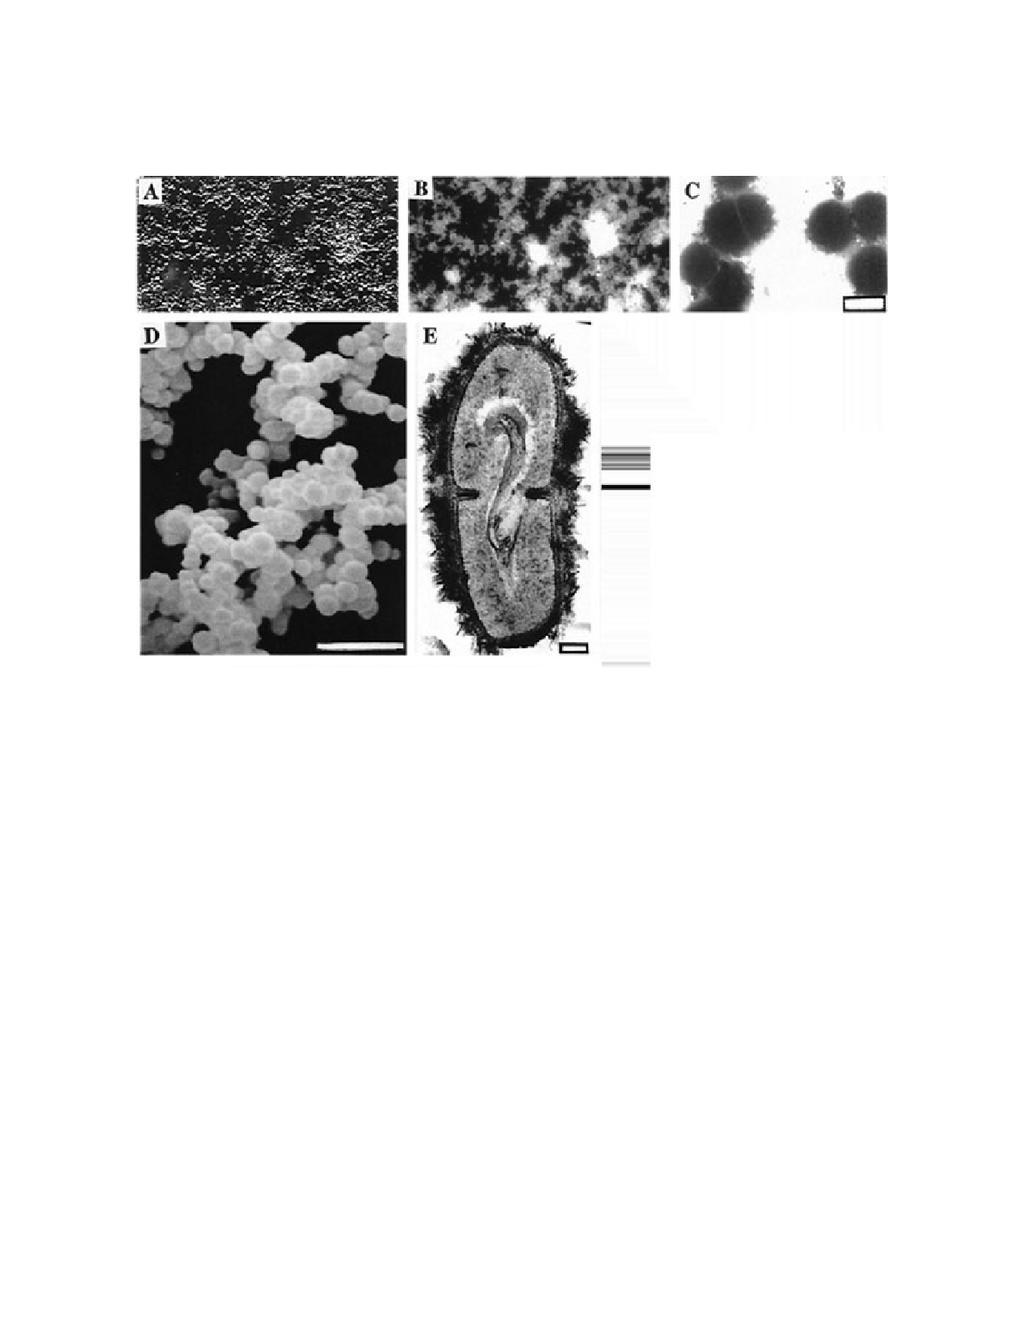 Data Sheet 1 for Part II Fig. 1. Light and electron microscopic images of nanobacteria. (A) DIC image of bottom-attached nanobacteria after a 2-month culture period.